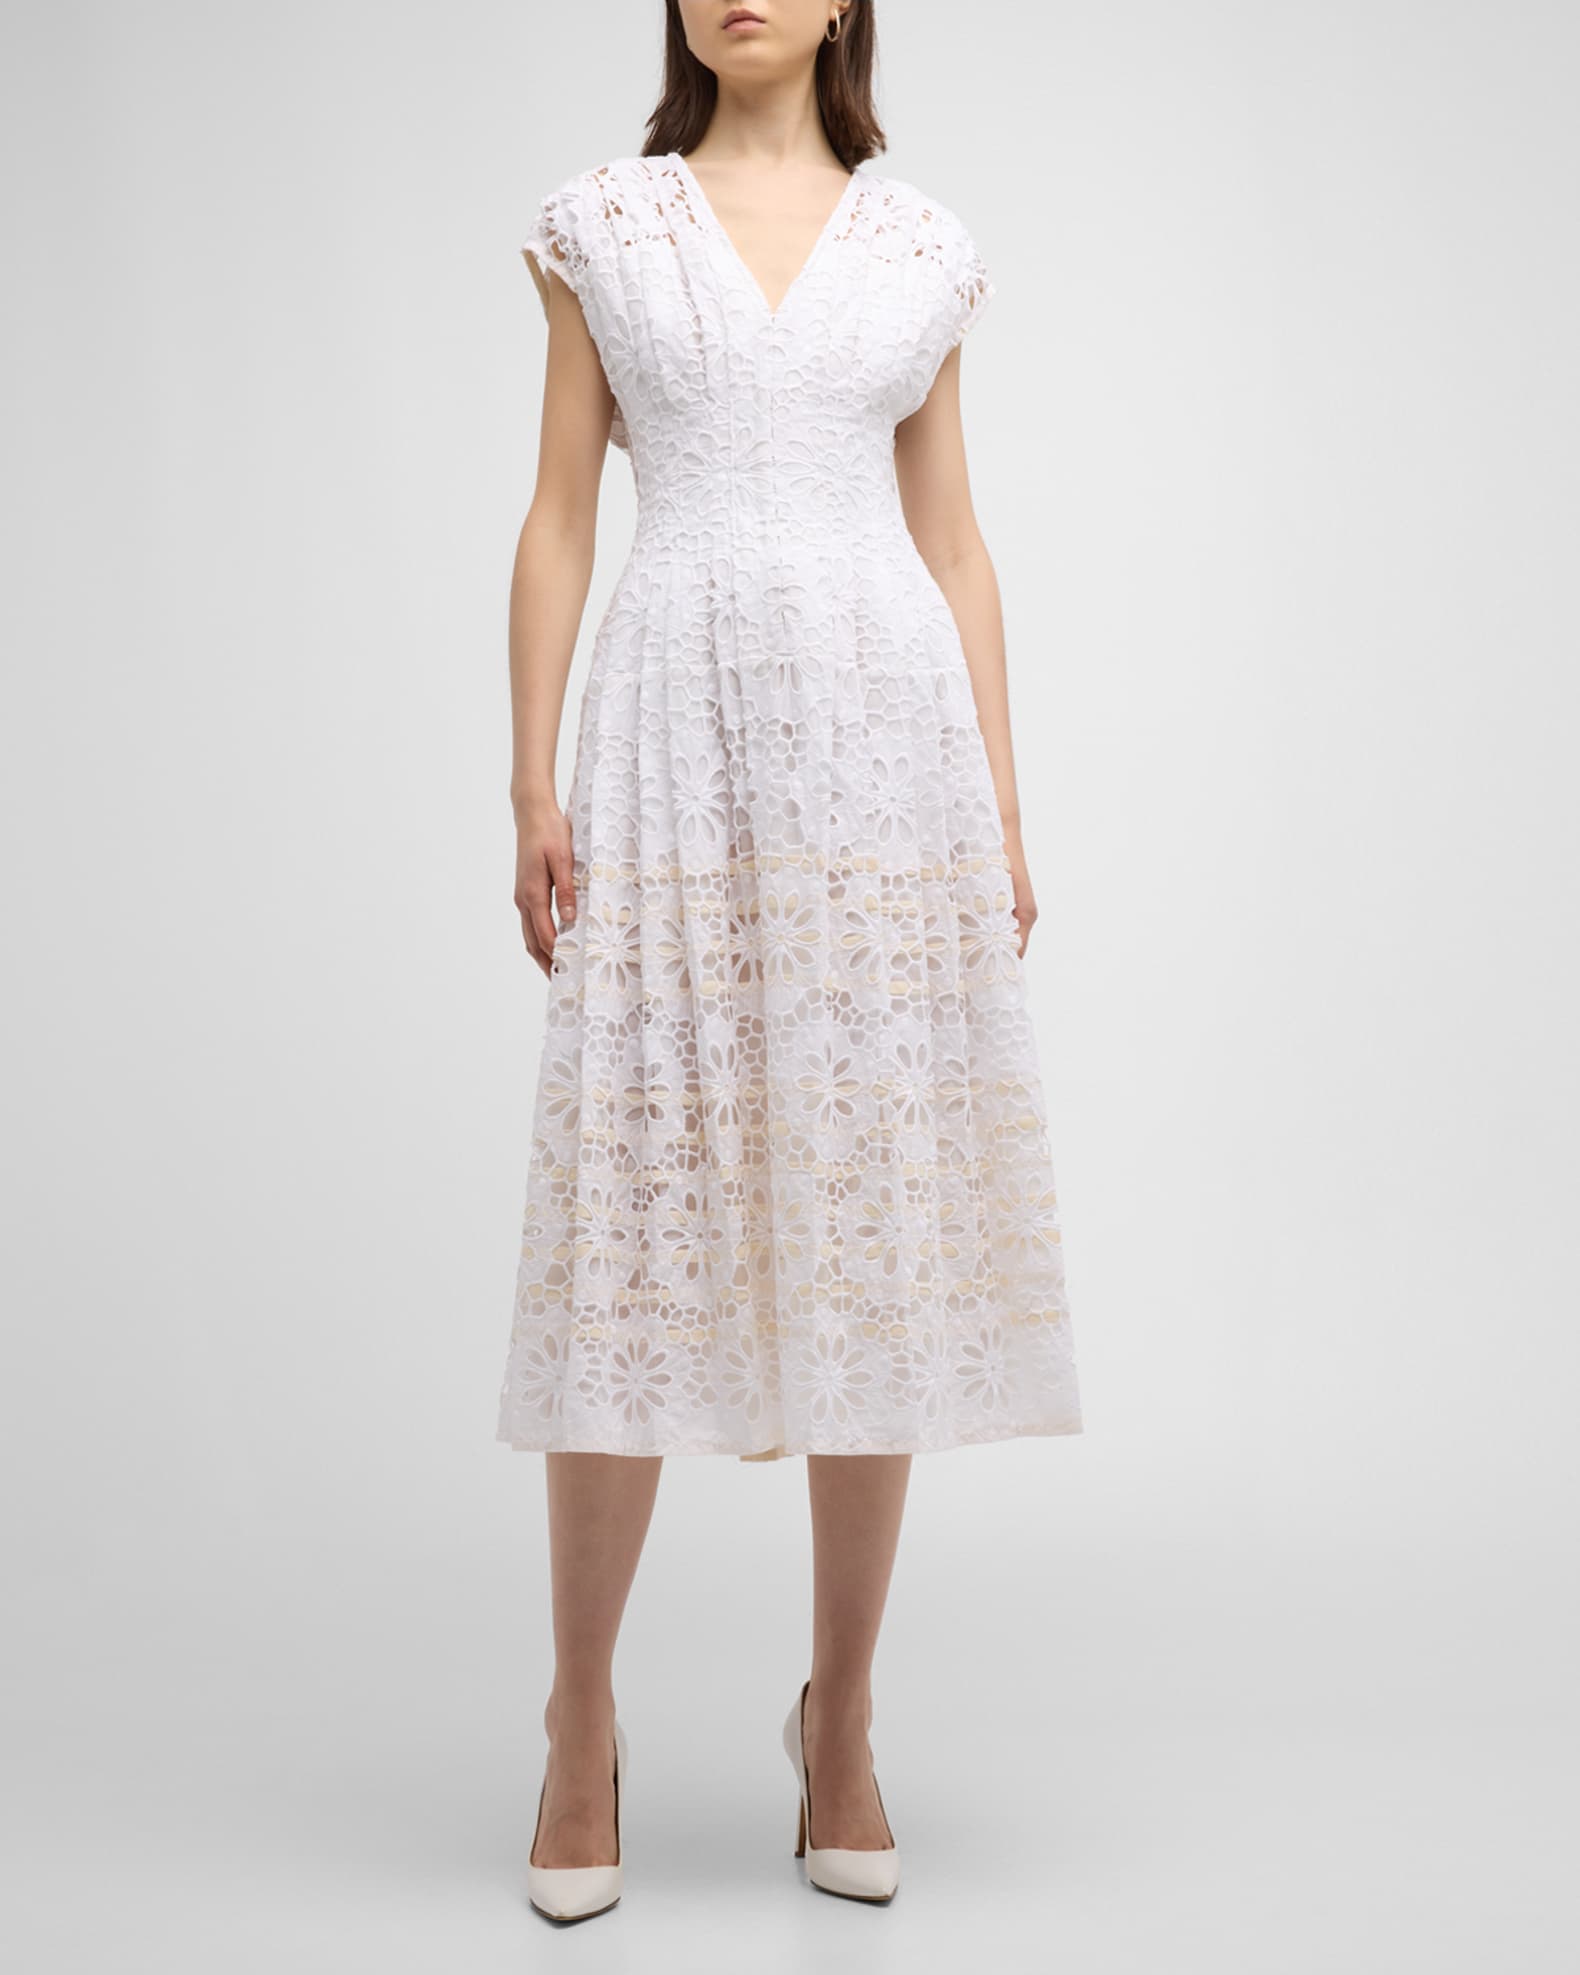 Tory Burch Claire McCardell Eyelet-Embroidered Midi Dress | Neiman Marcus